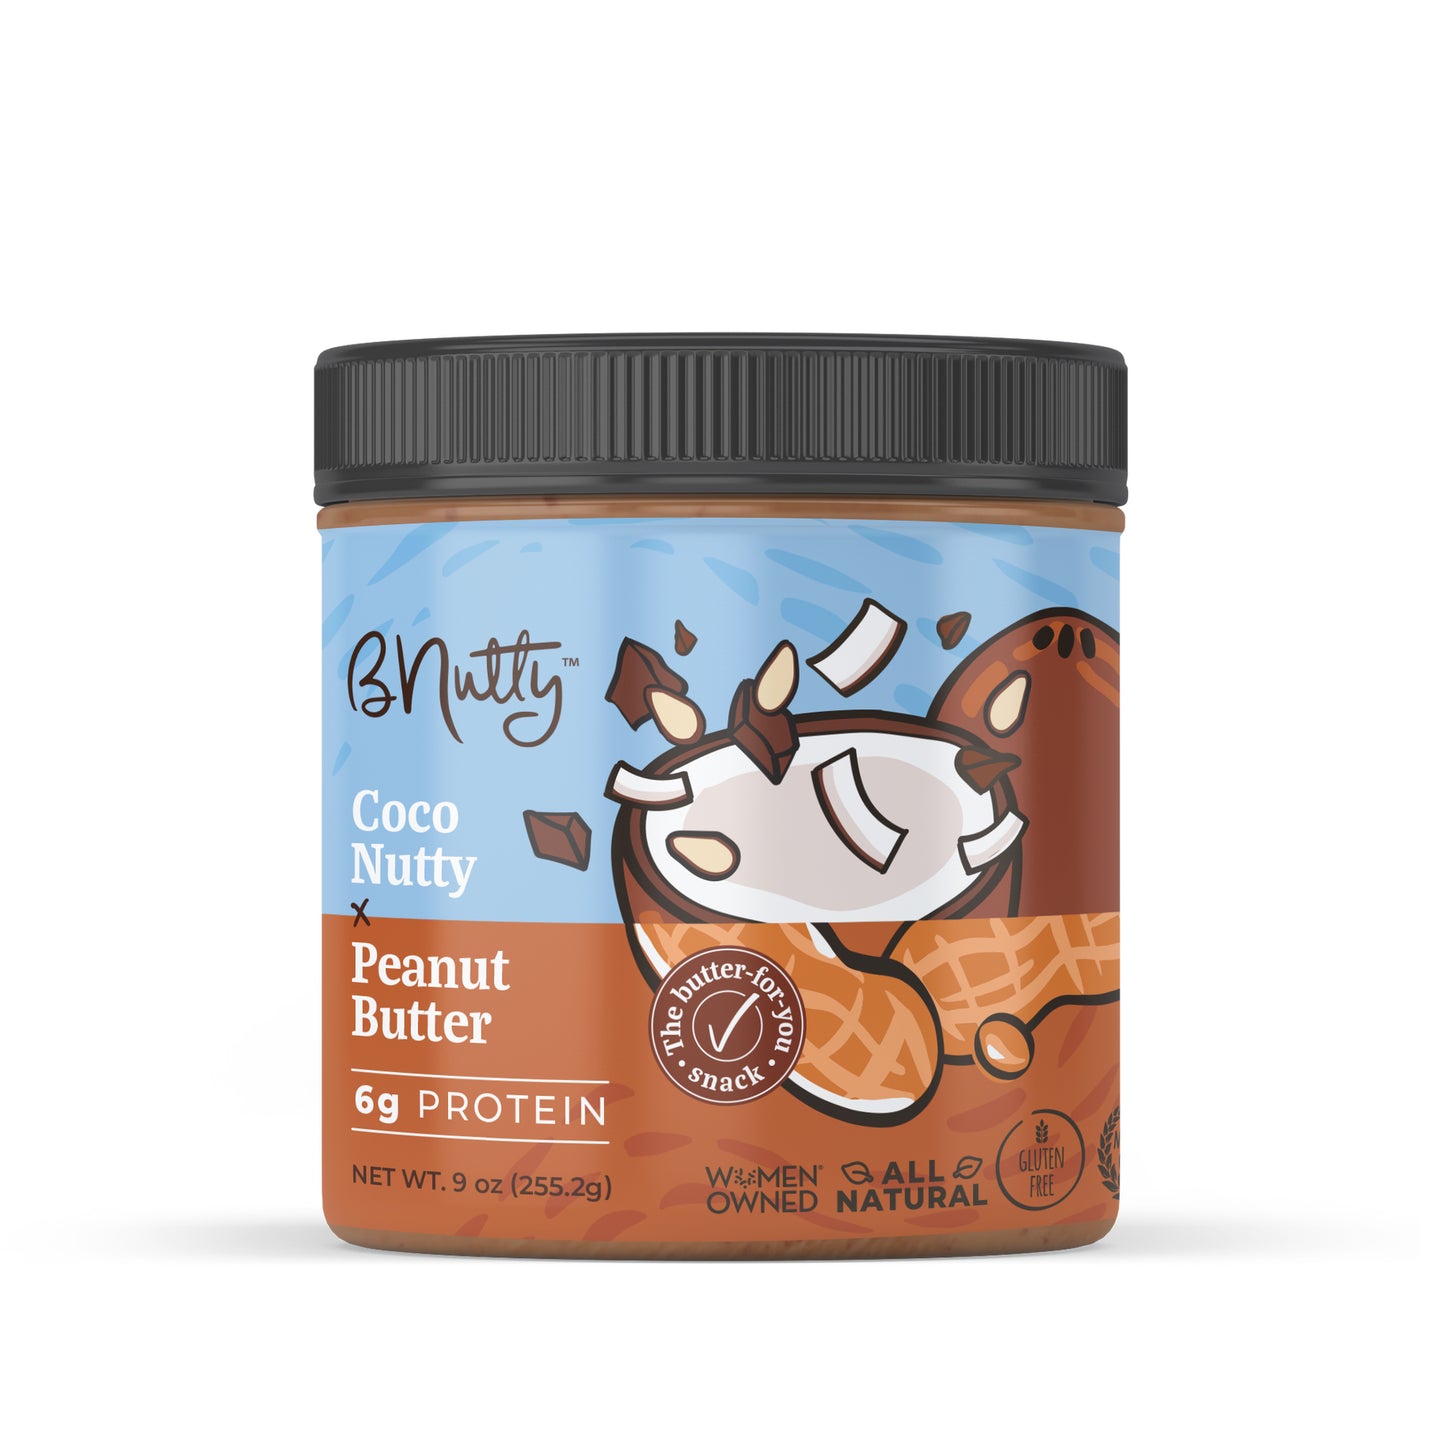 Coco Nutty Peanut Butter